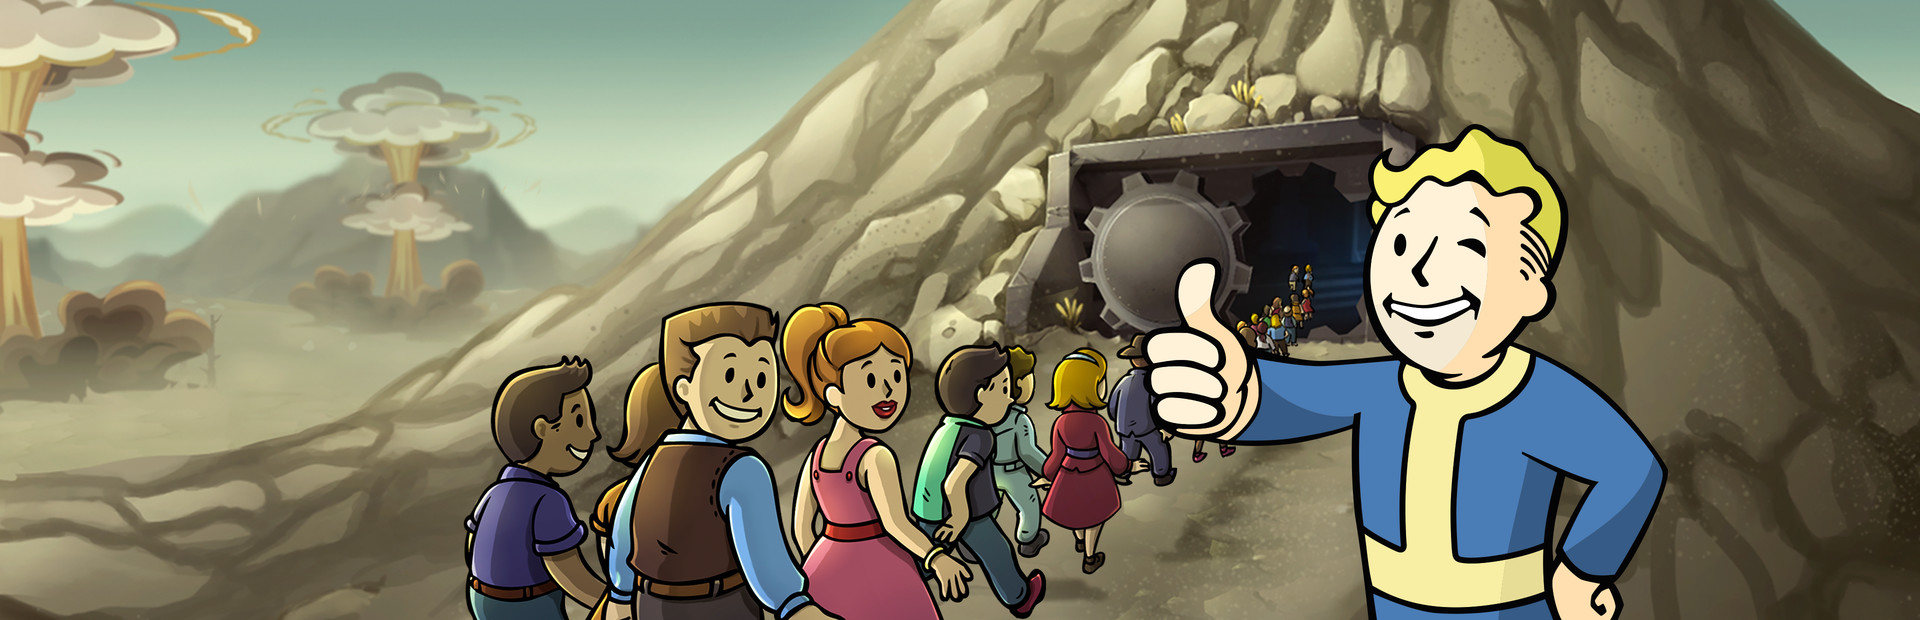 Fallout Shelter cover image